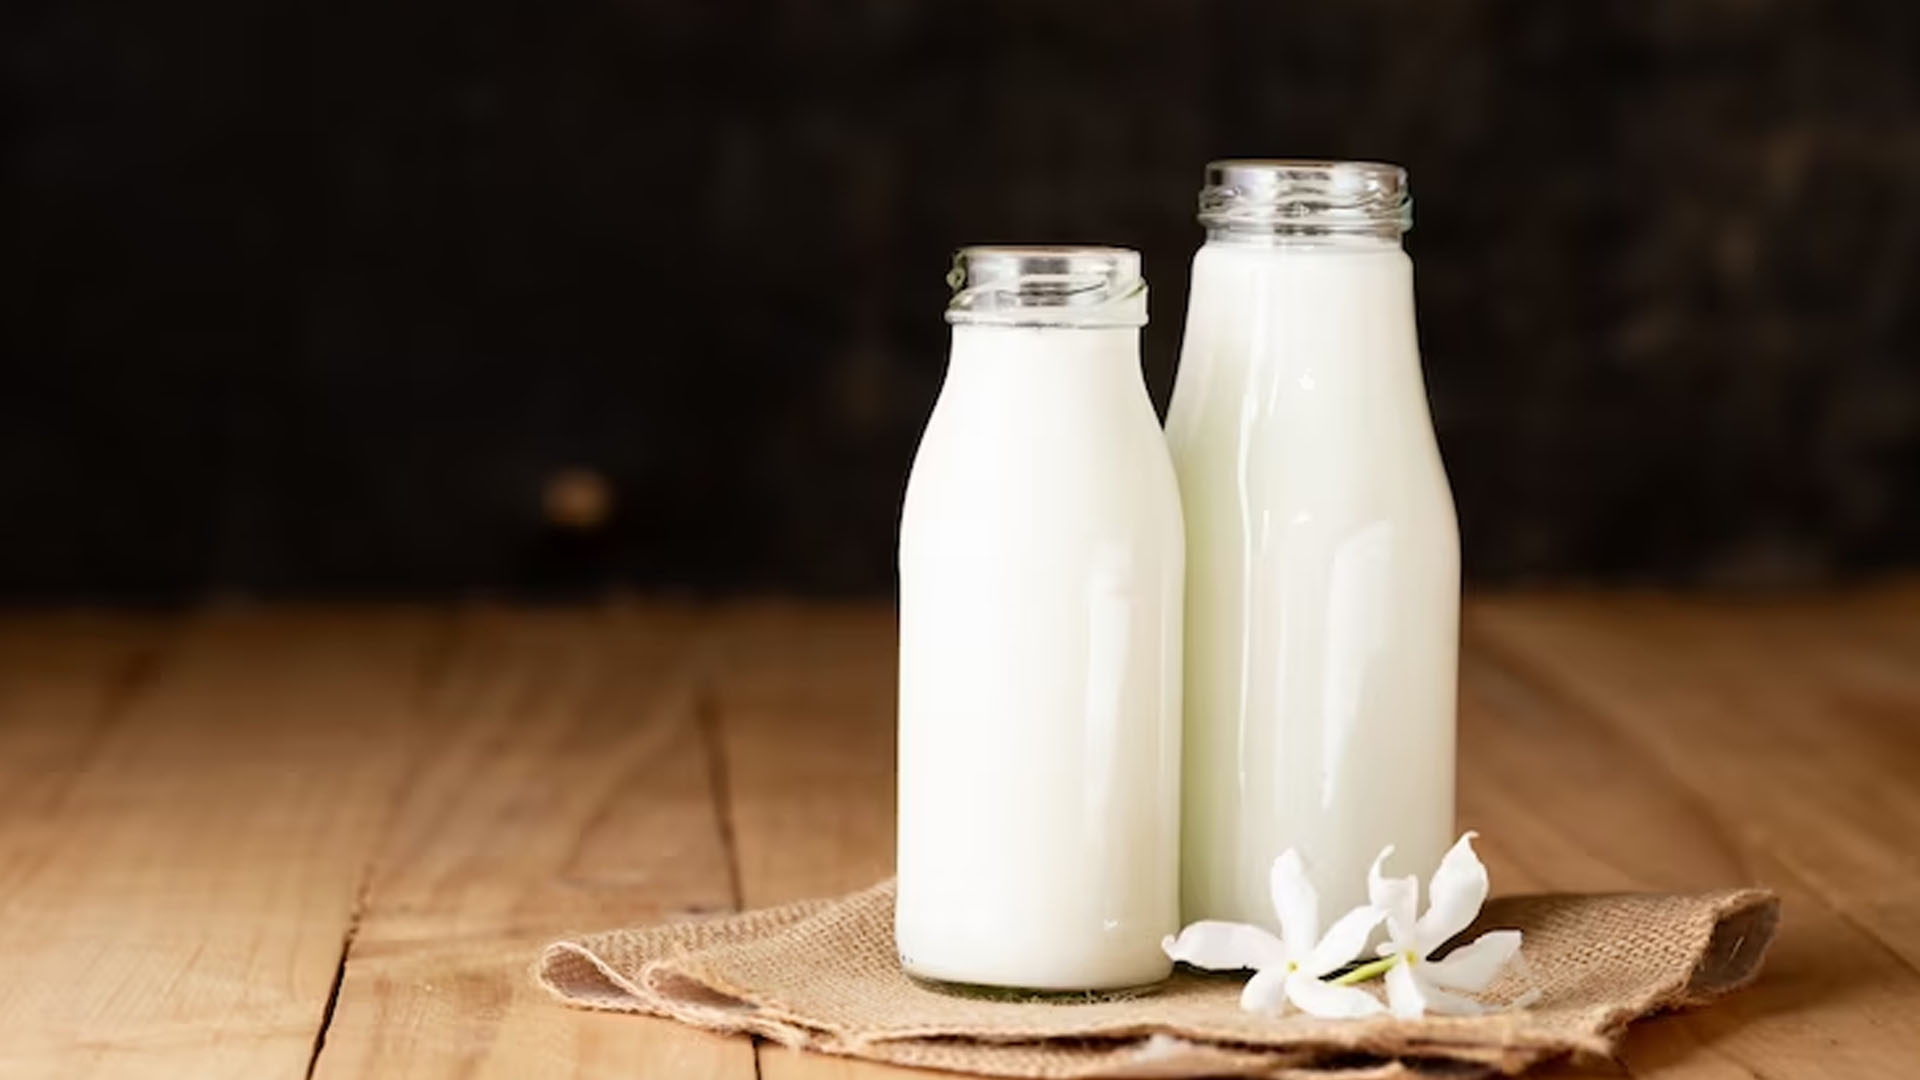 What Are The Health Benefits of Milk?